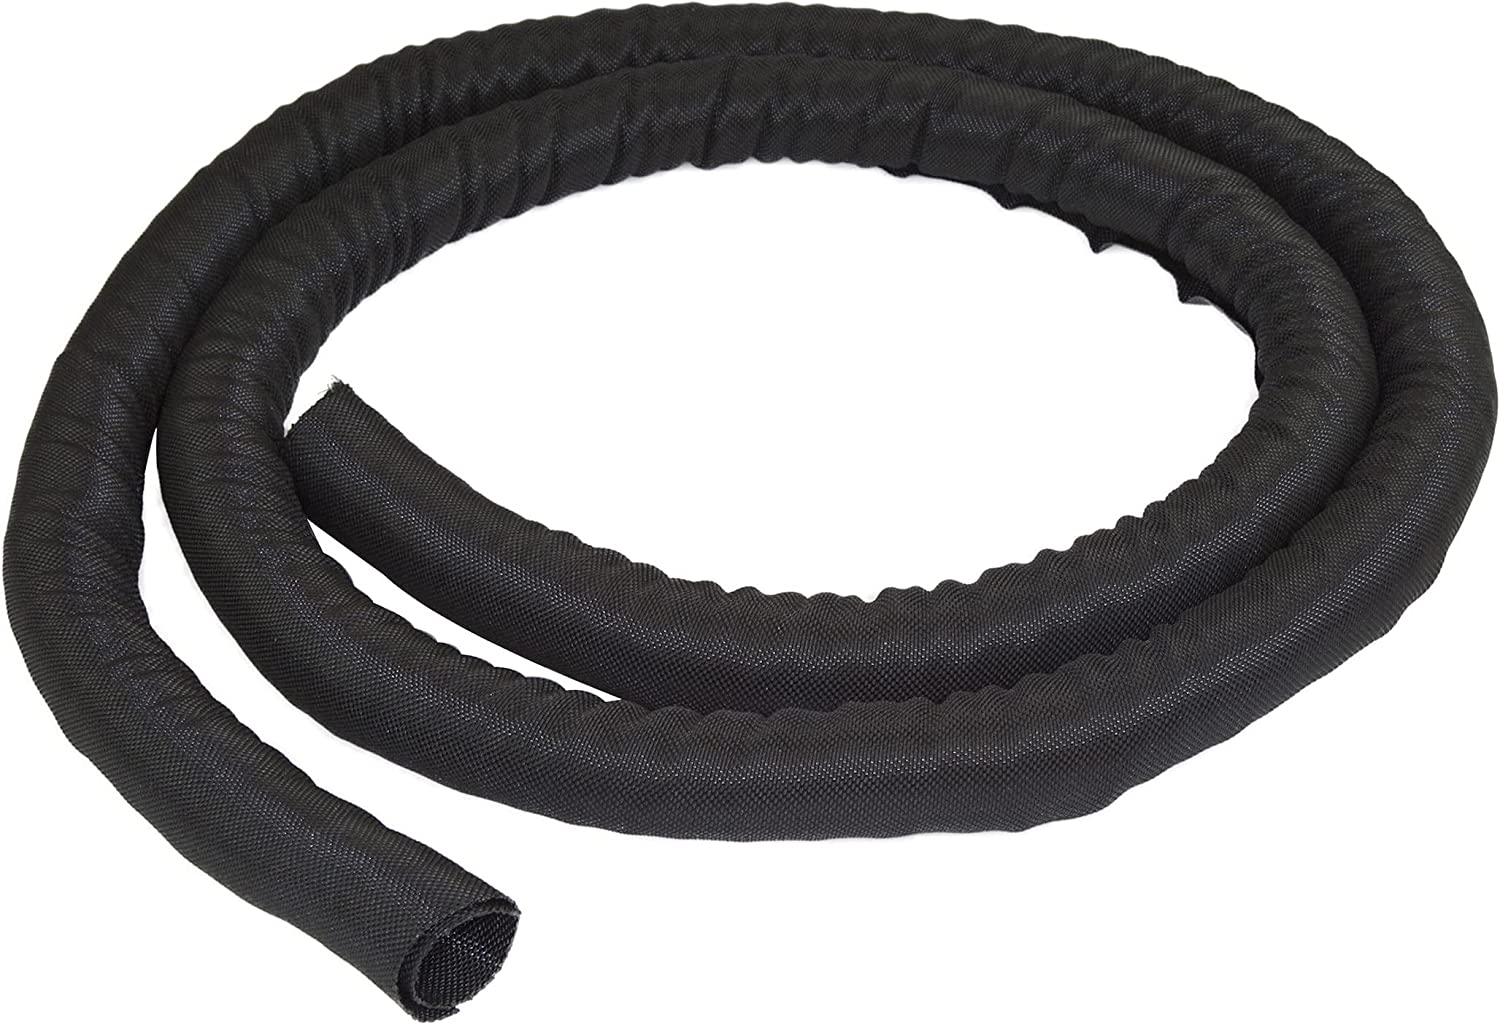 StarTech.com 6.5&#39; (2m) Cable Management Sleeve - Flexible Coiled Cable Wrap - 1.0-1.5&#34; dia. Expandable Sleeve - Polyester Cord Manager/Protector/Concealer - Black Trimmable Cable Organizer (WKSTNCM)